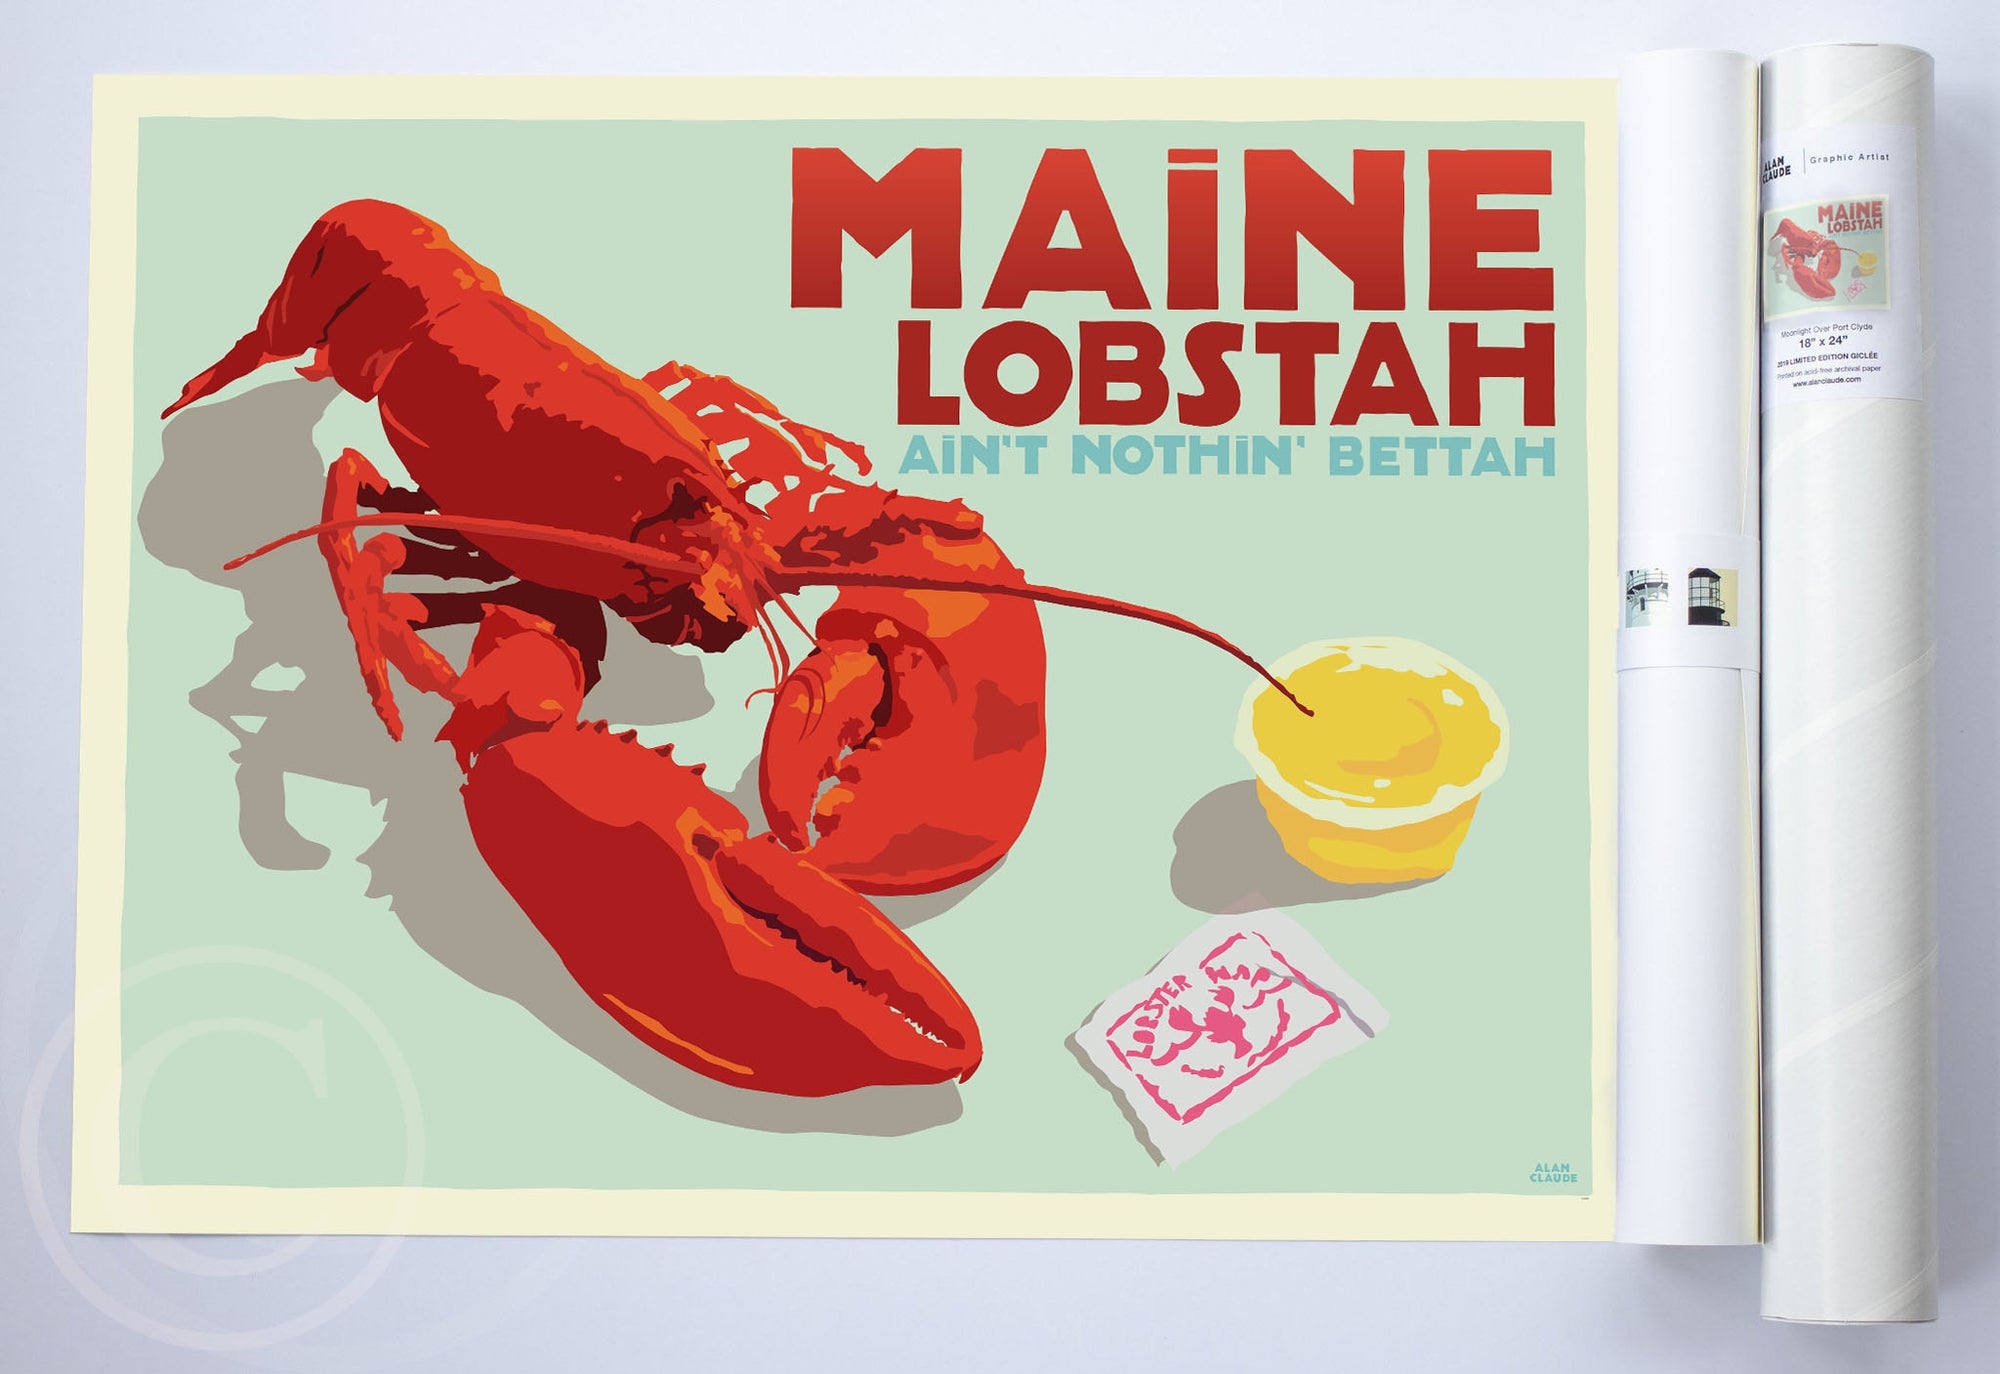 Maine Lobstah With Butter Art Print 18" x 24" Horizontal Wall Poster By Alan Claude - Maine